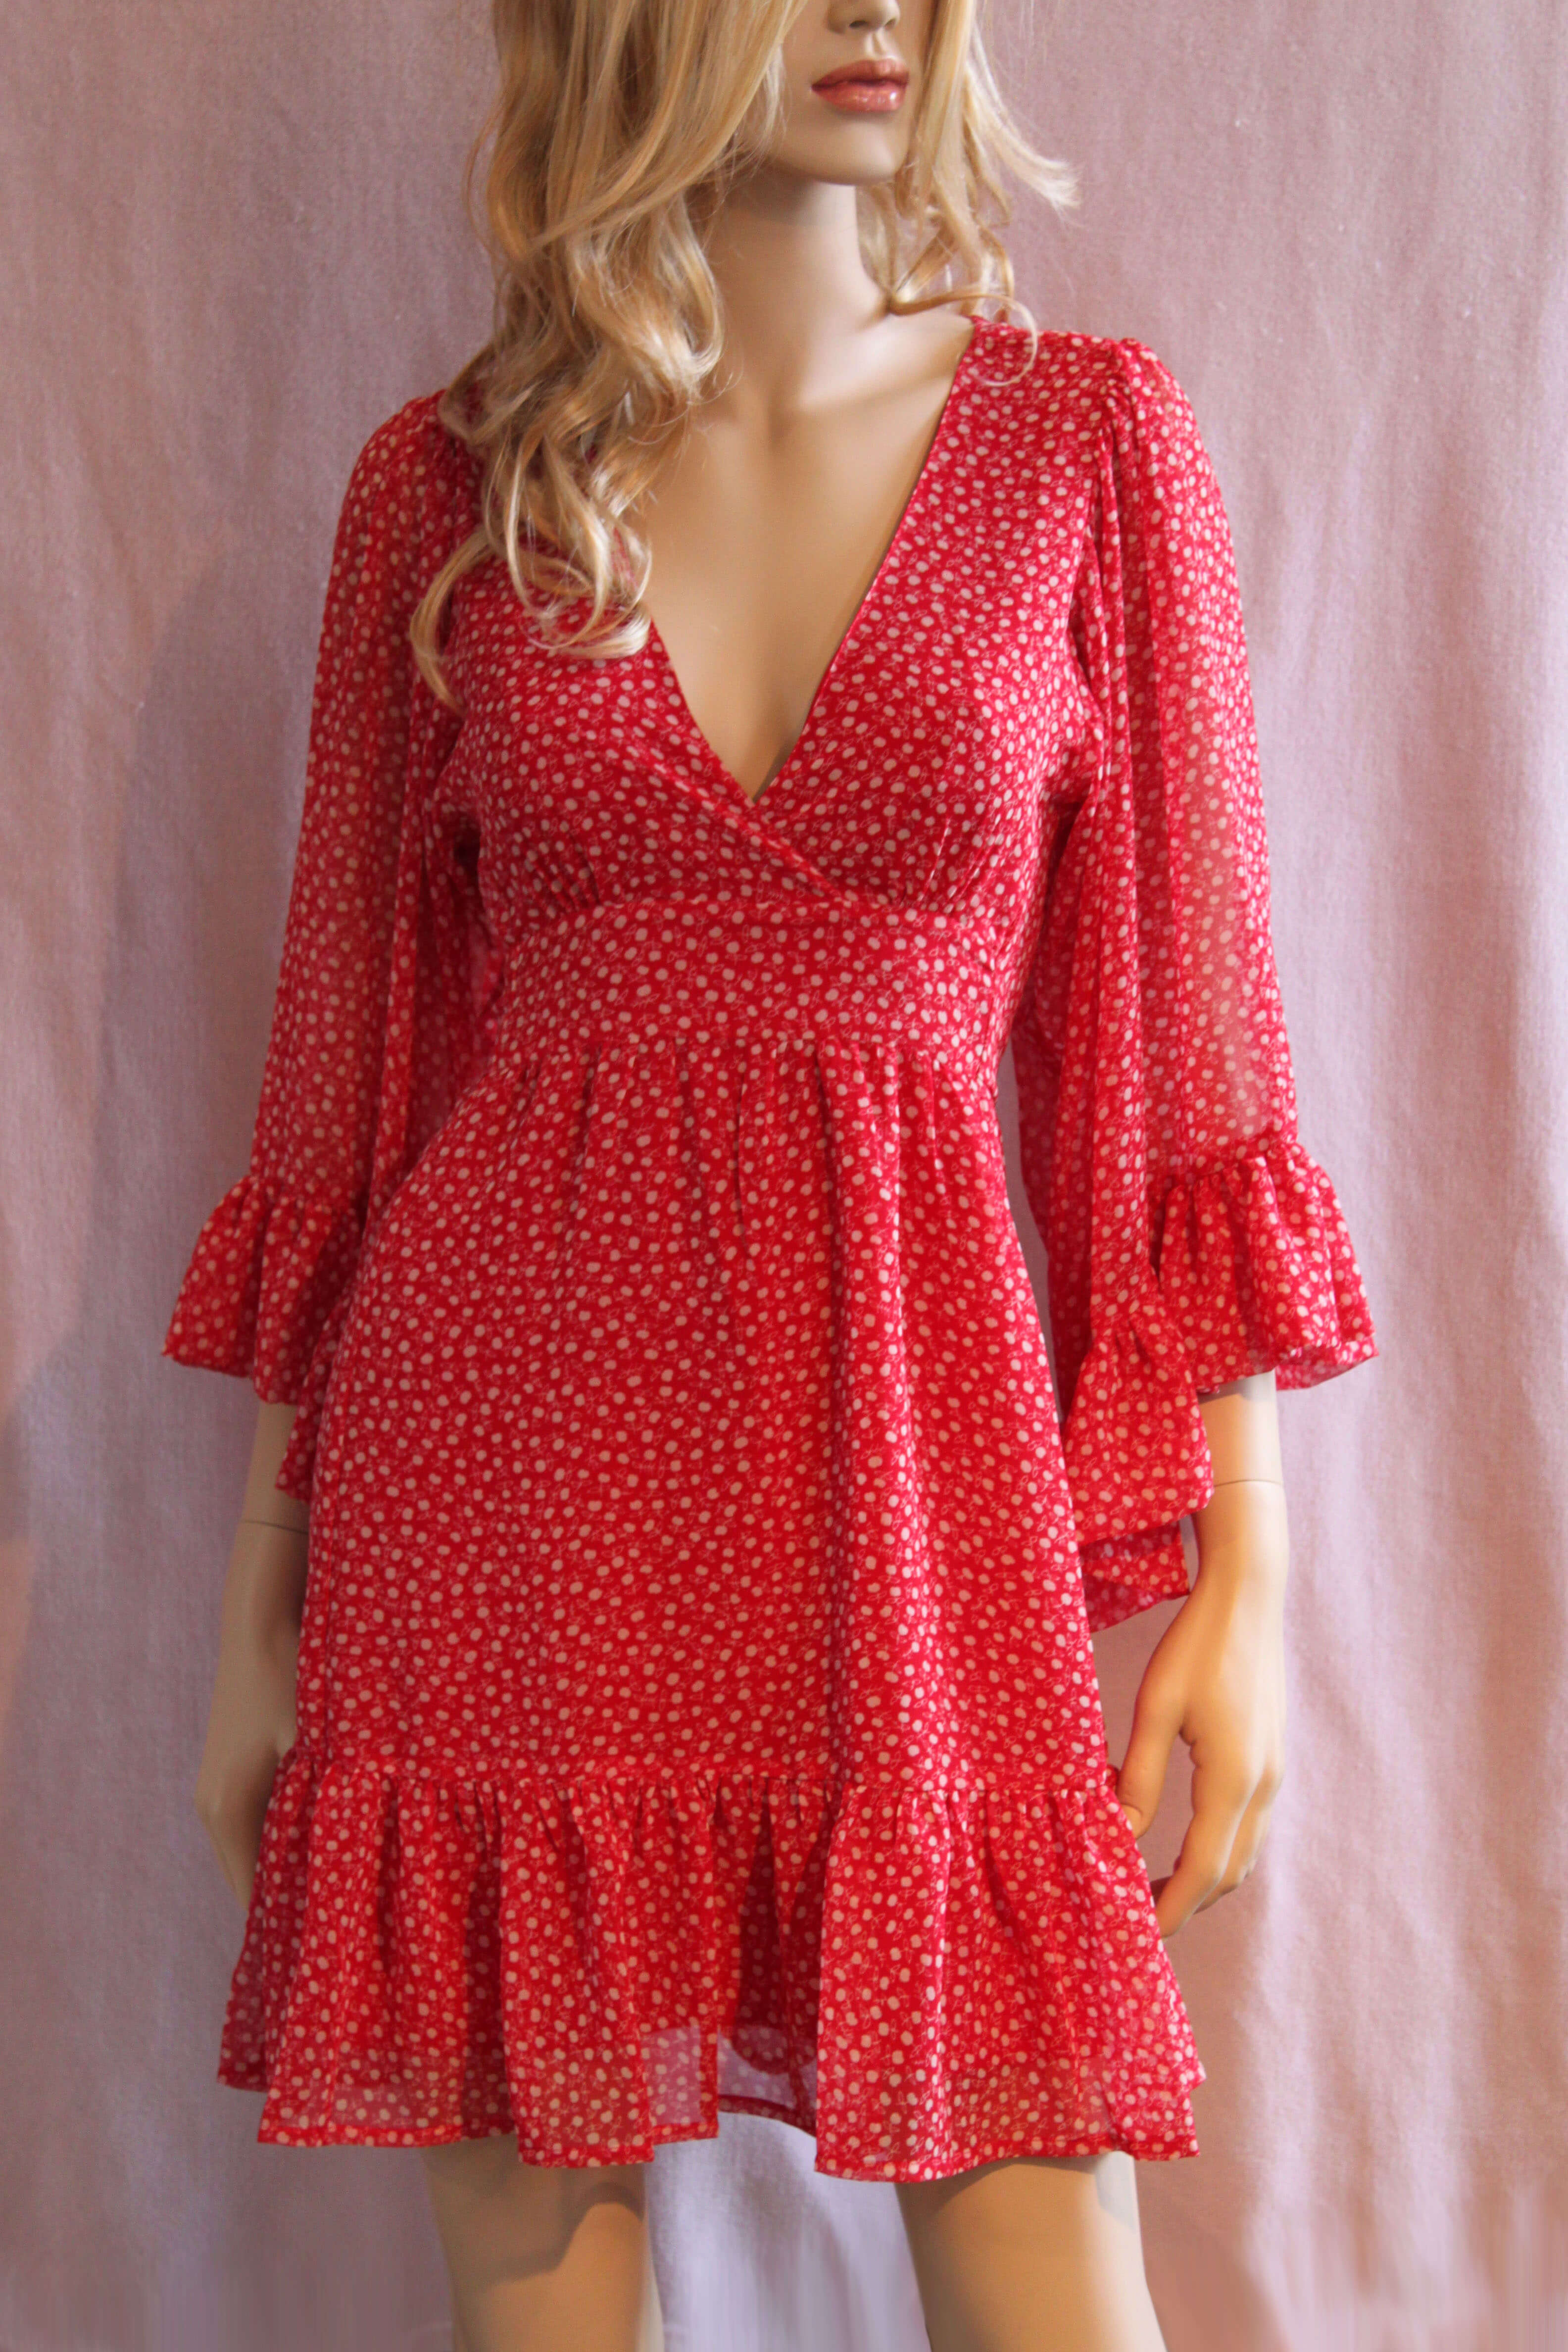 dating dress red